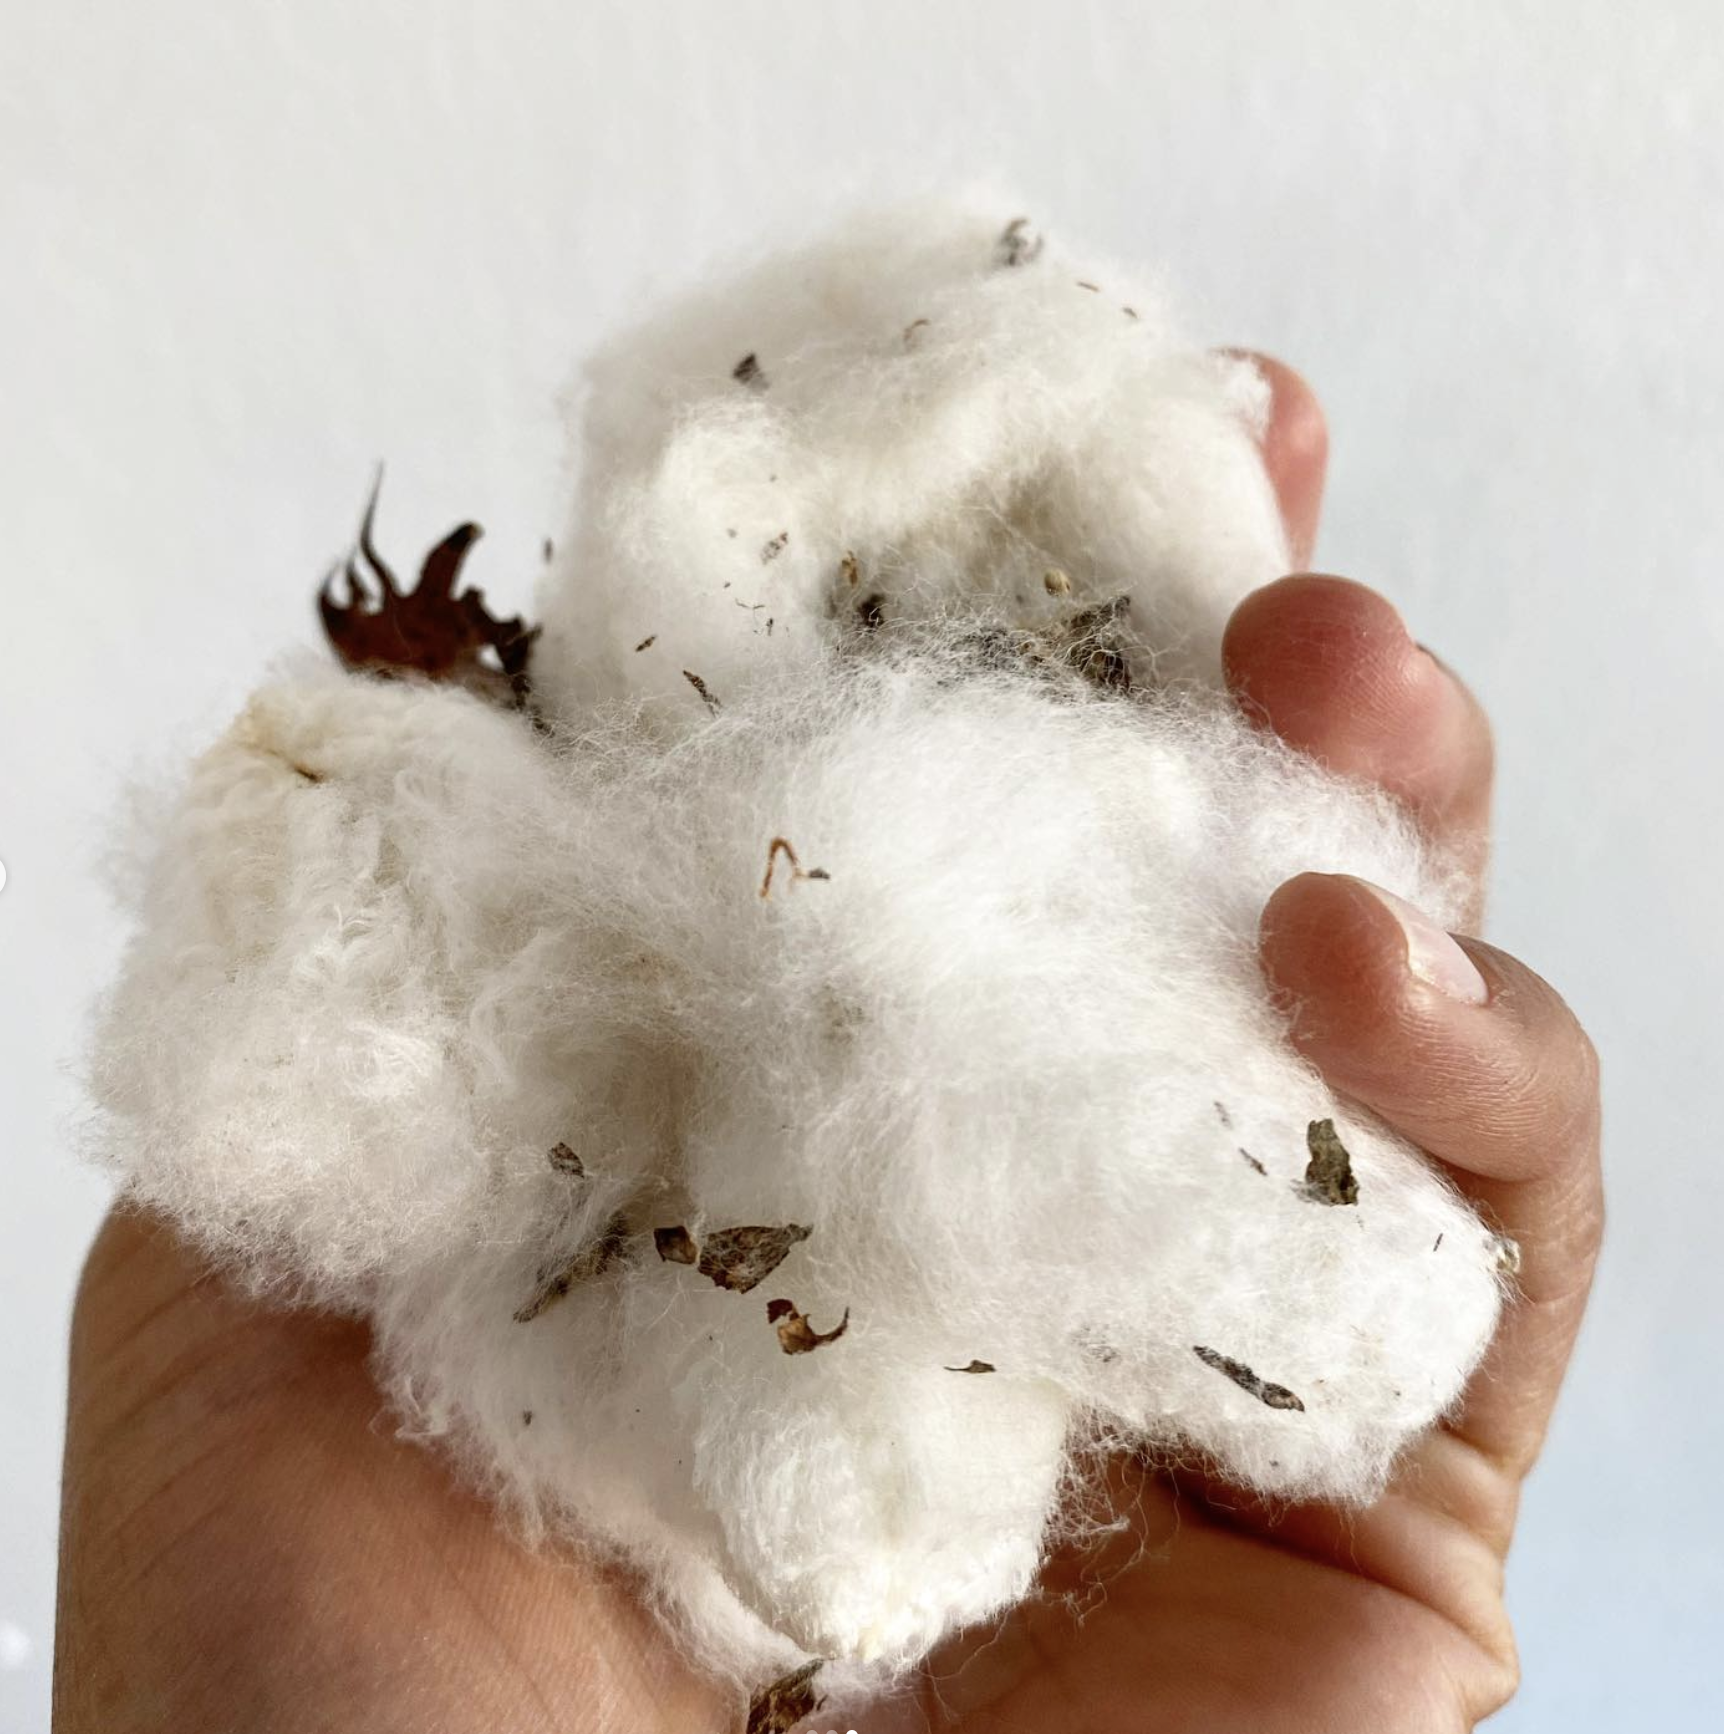  In 2020 I purchased using raw cotton grown from by a black-owned farm in Northampton County, North Carolina that founded the company  Black Cotton .   Instead of spinning the cotton to make fabric, which was my original intent, I decided I wanted to